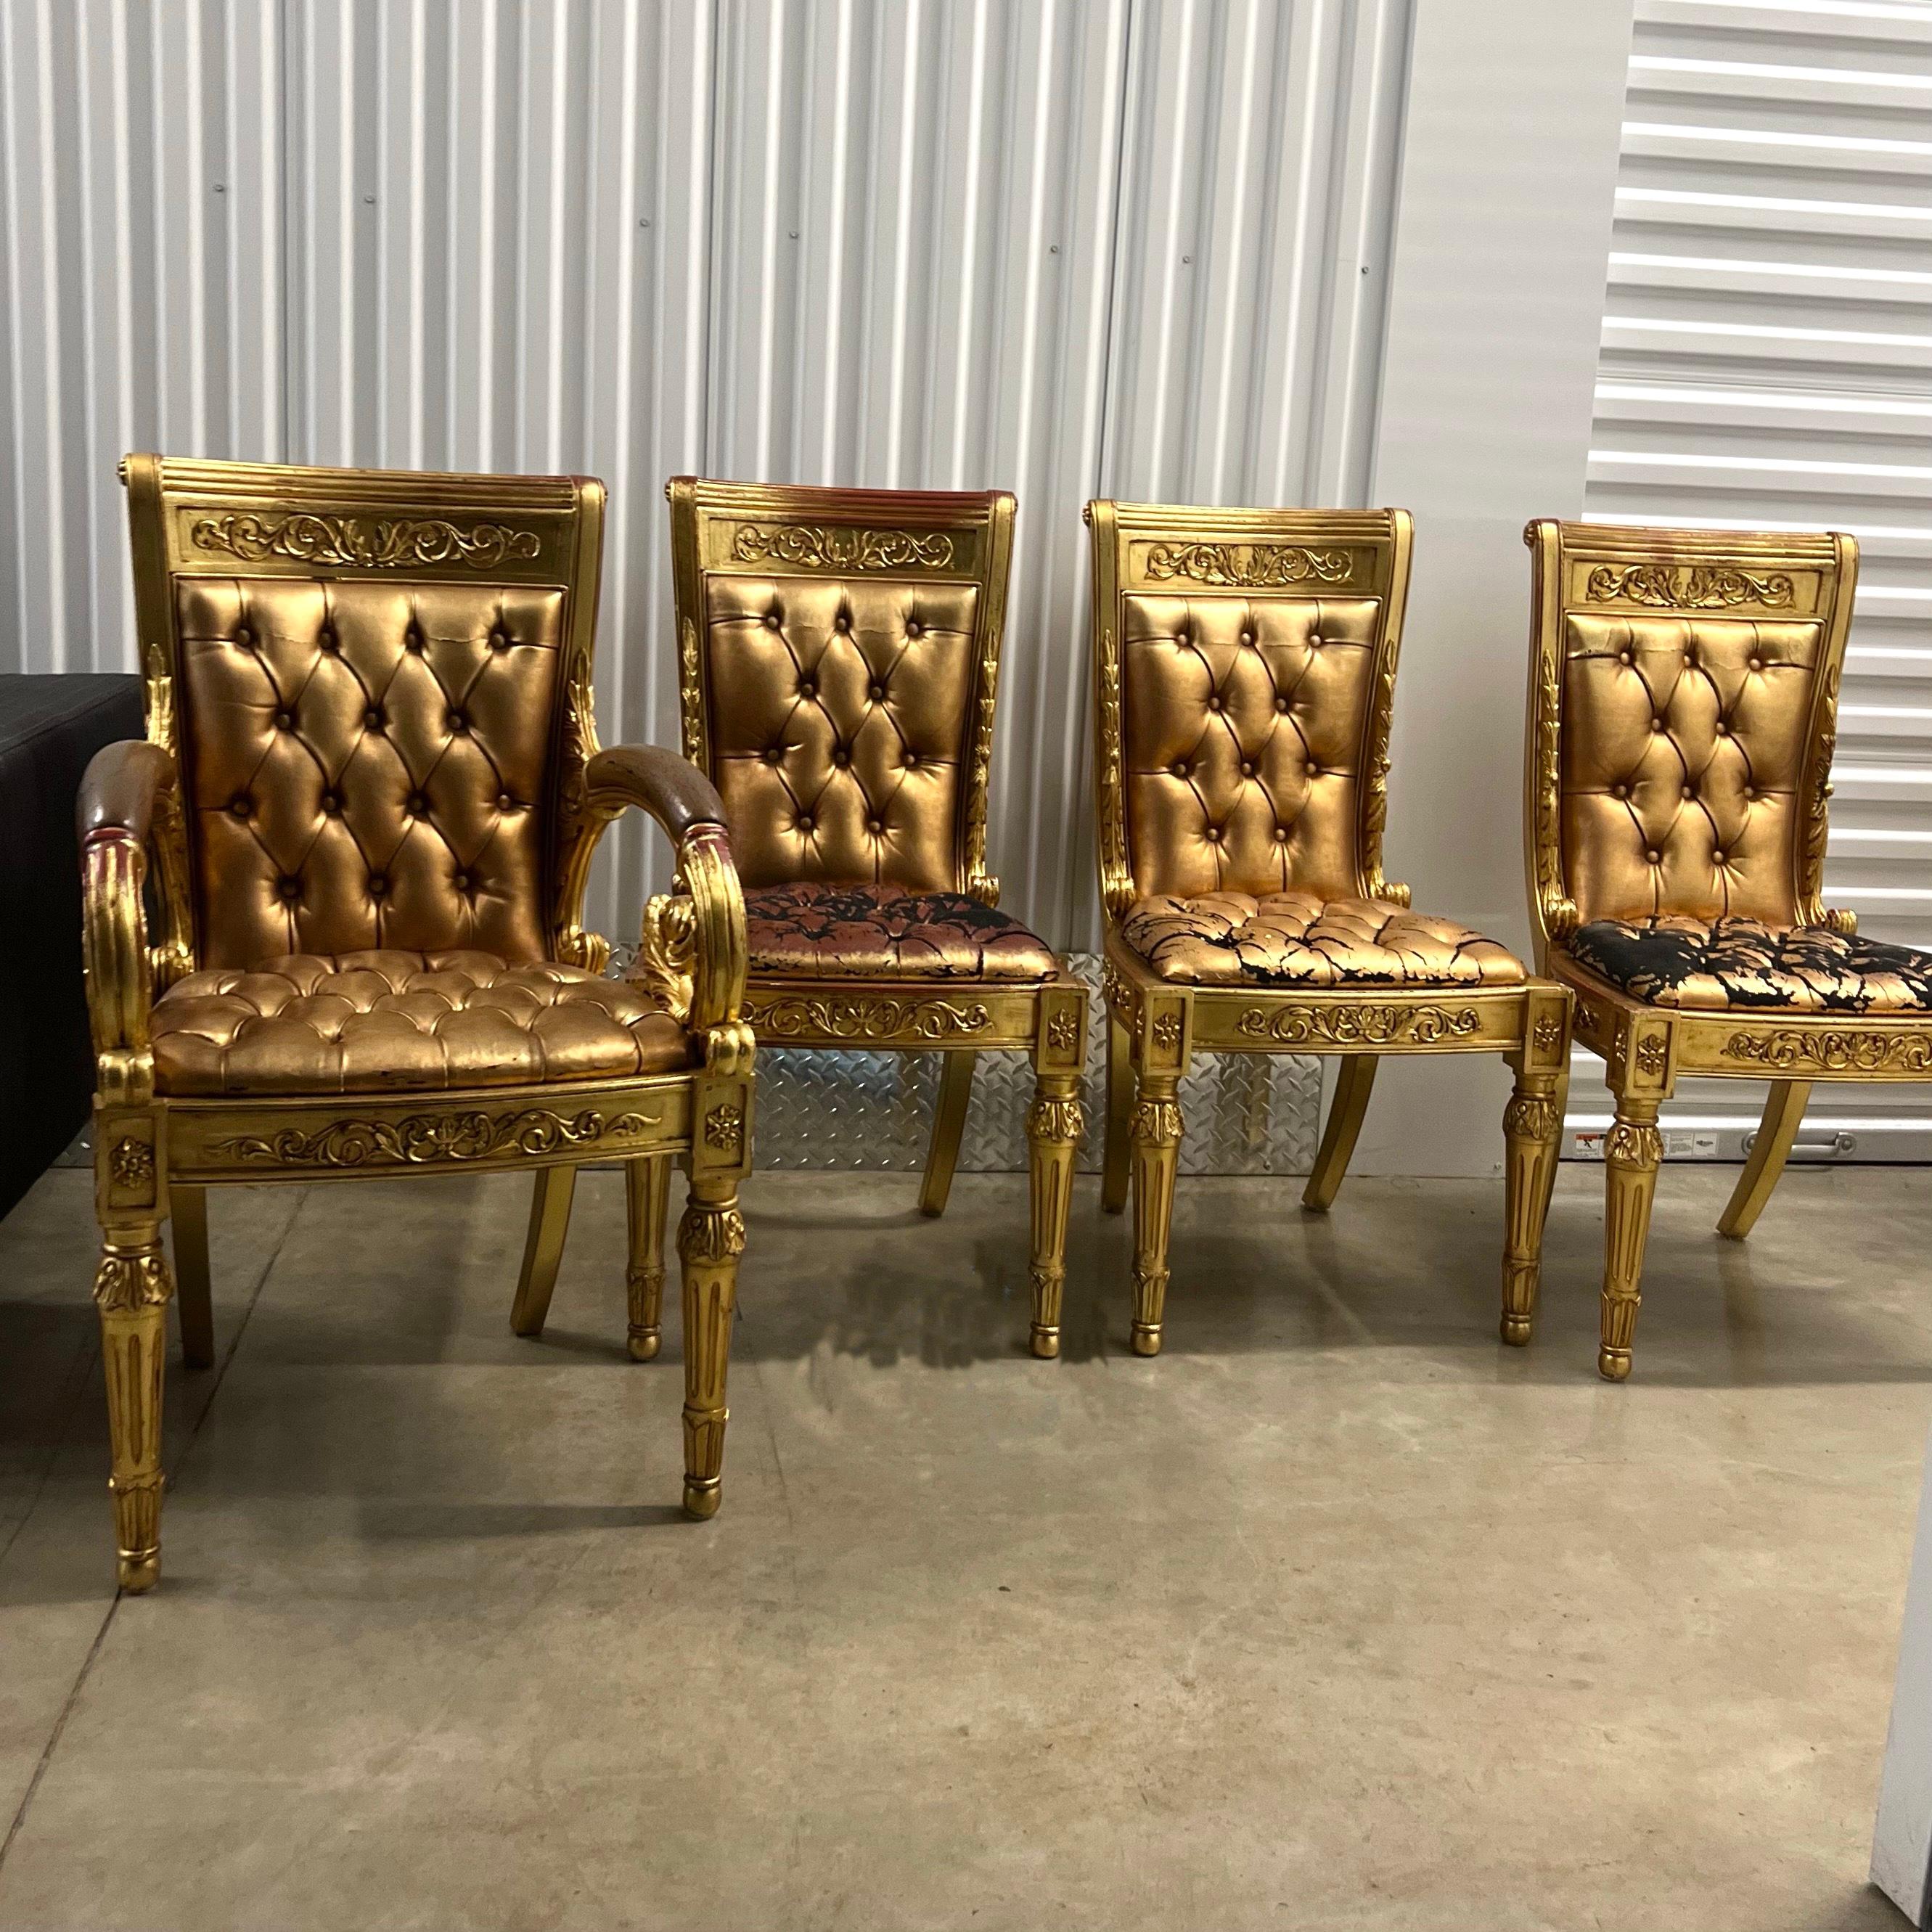 Versace Original Vanitas Gilt Dining Chair Set of 6, Gianni Versace, 1994. Listing is for set of 6 (2 armchairs and 4 without arms). The shape of the Vanitas took inspiration from a Louis XV chair bought by Gianni Versace from a French antique